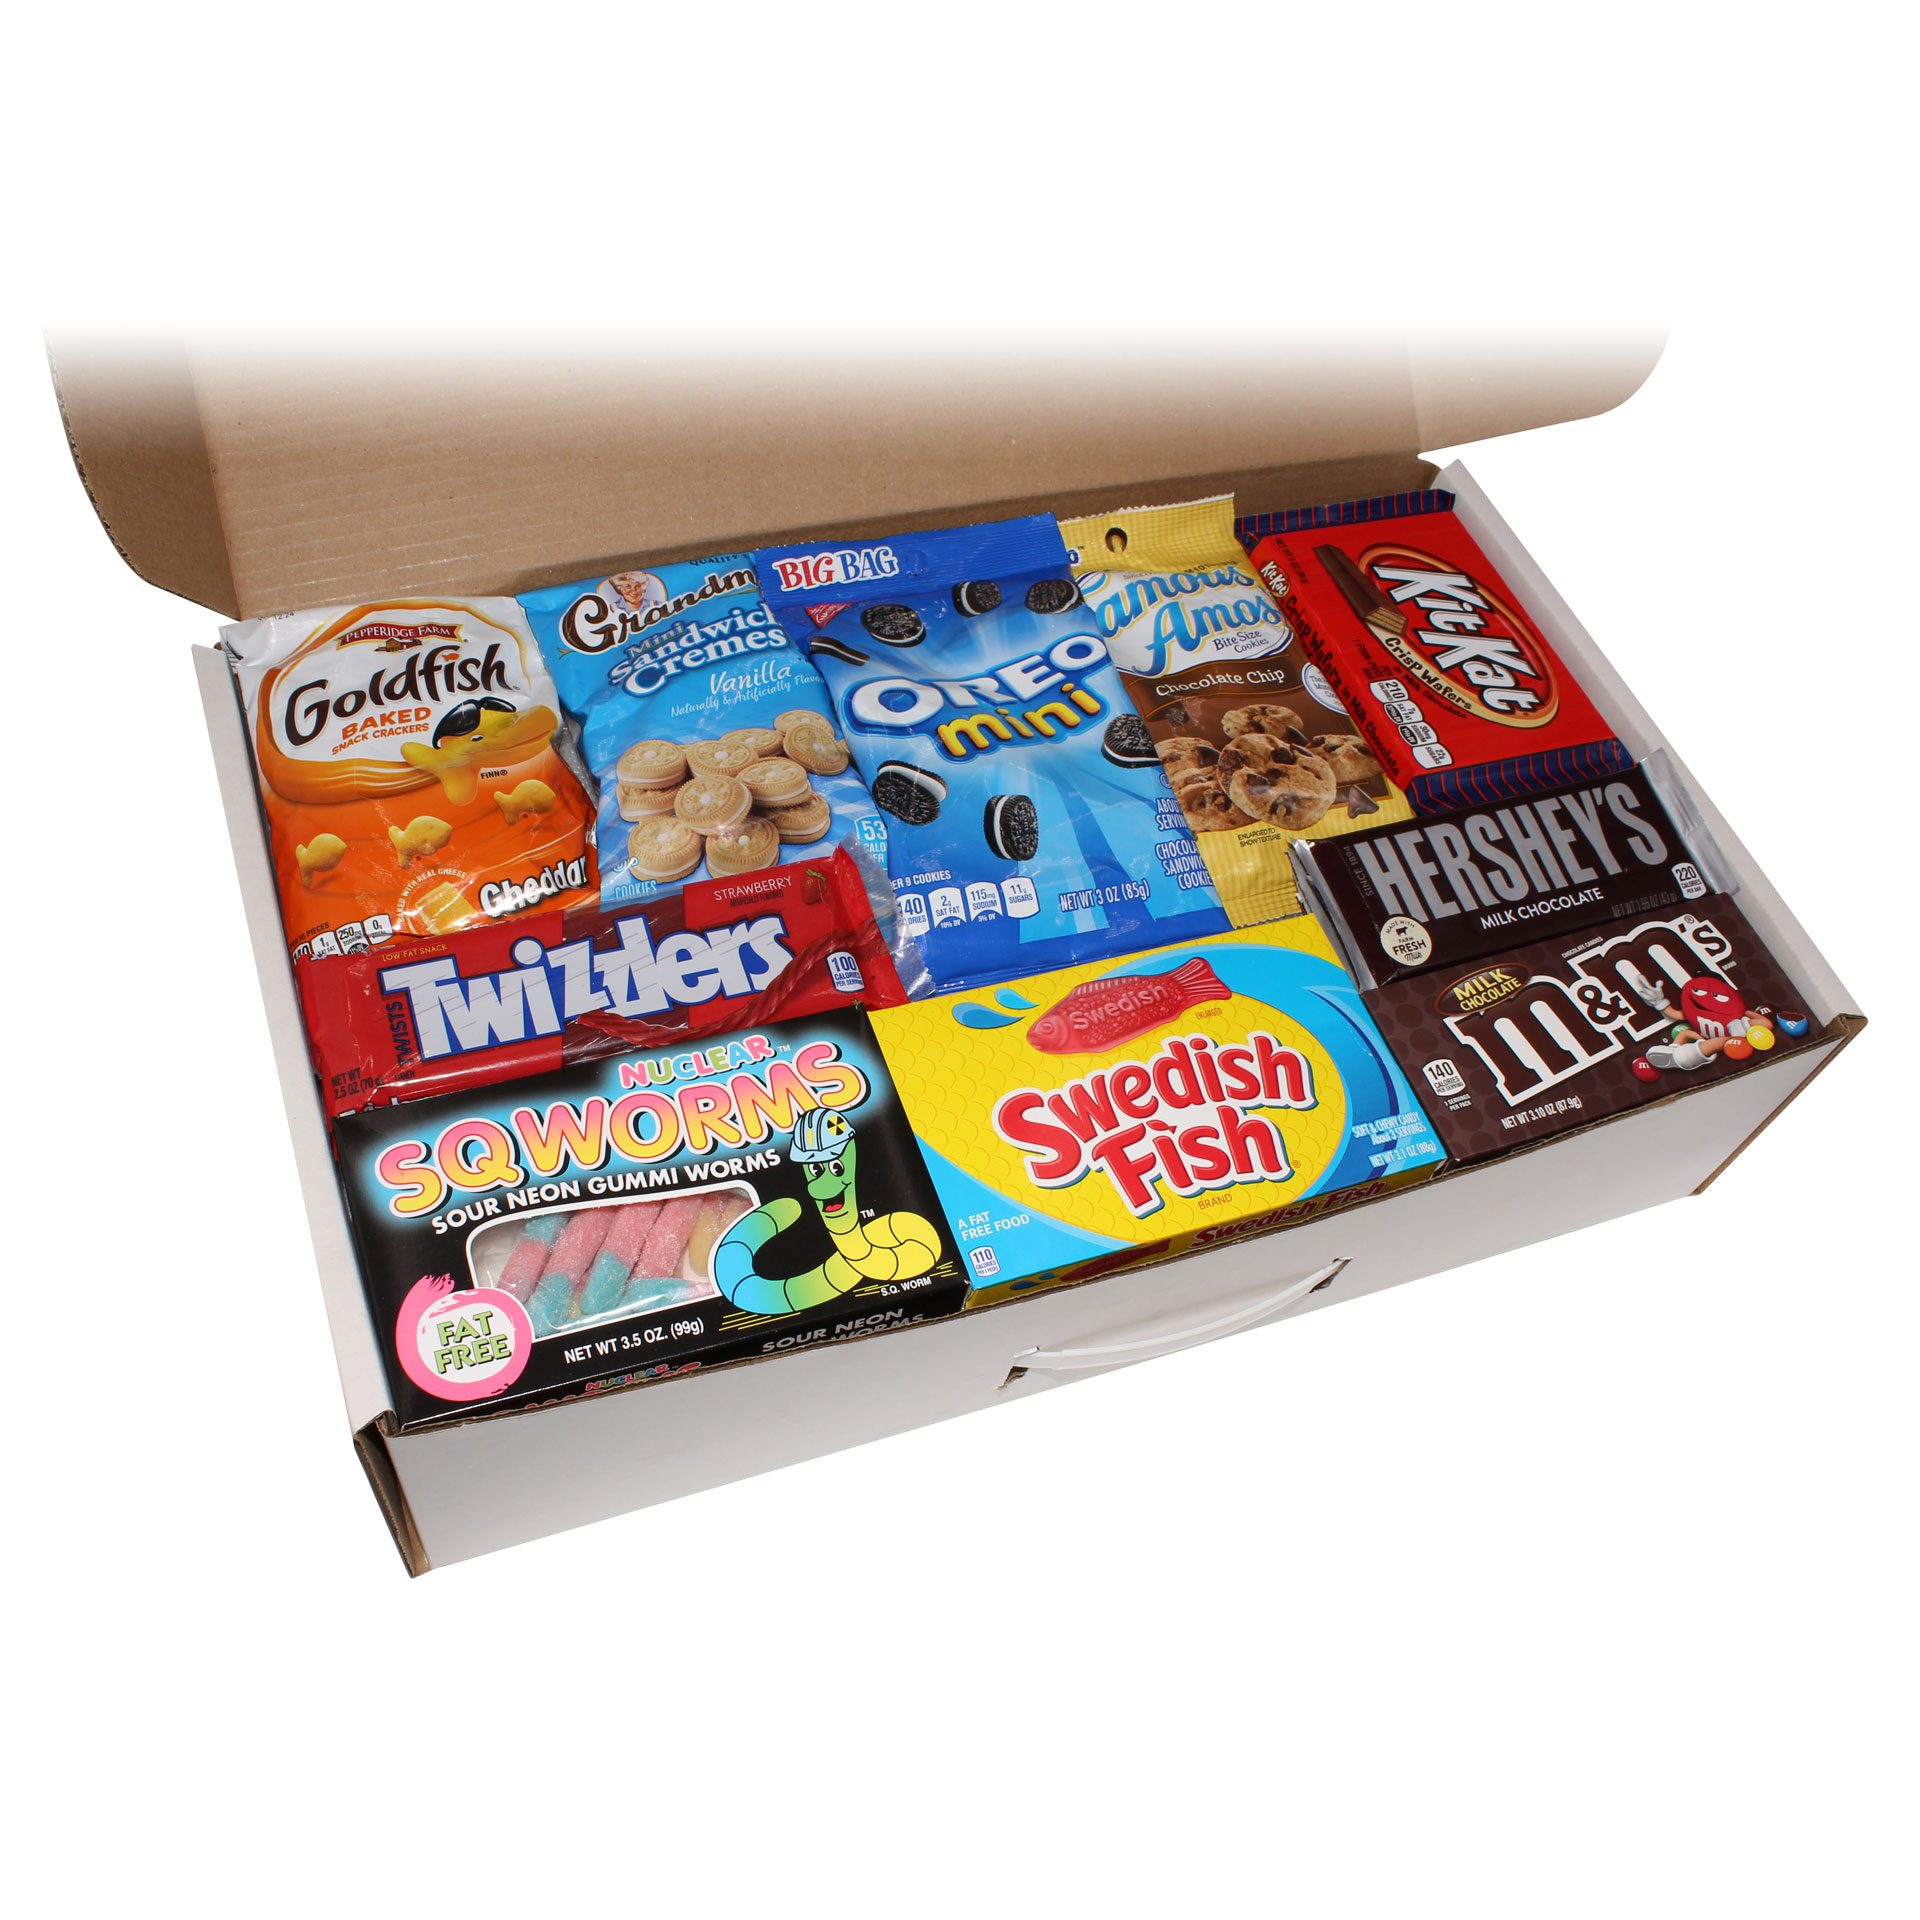 candy snack box